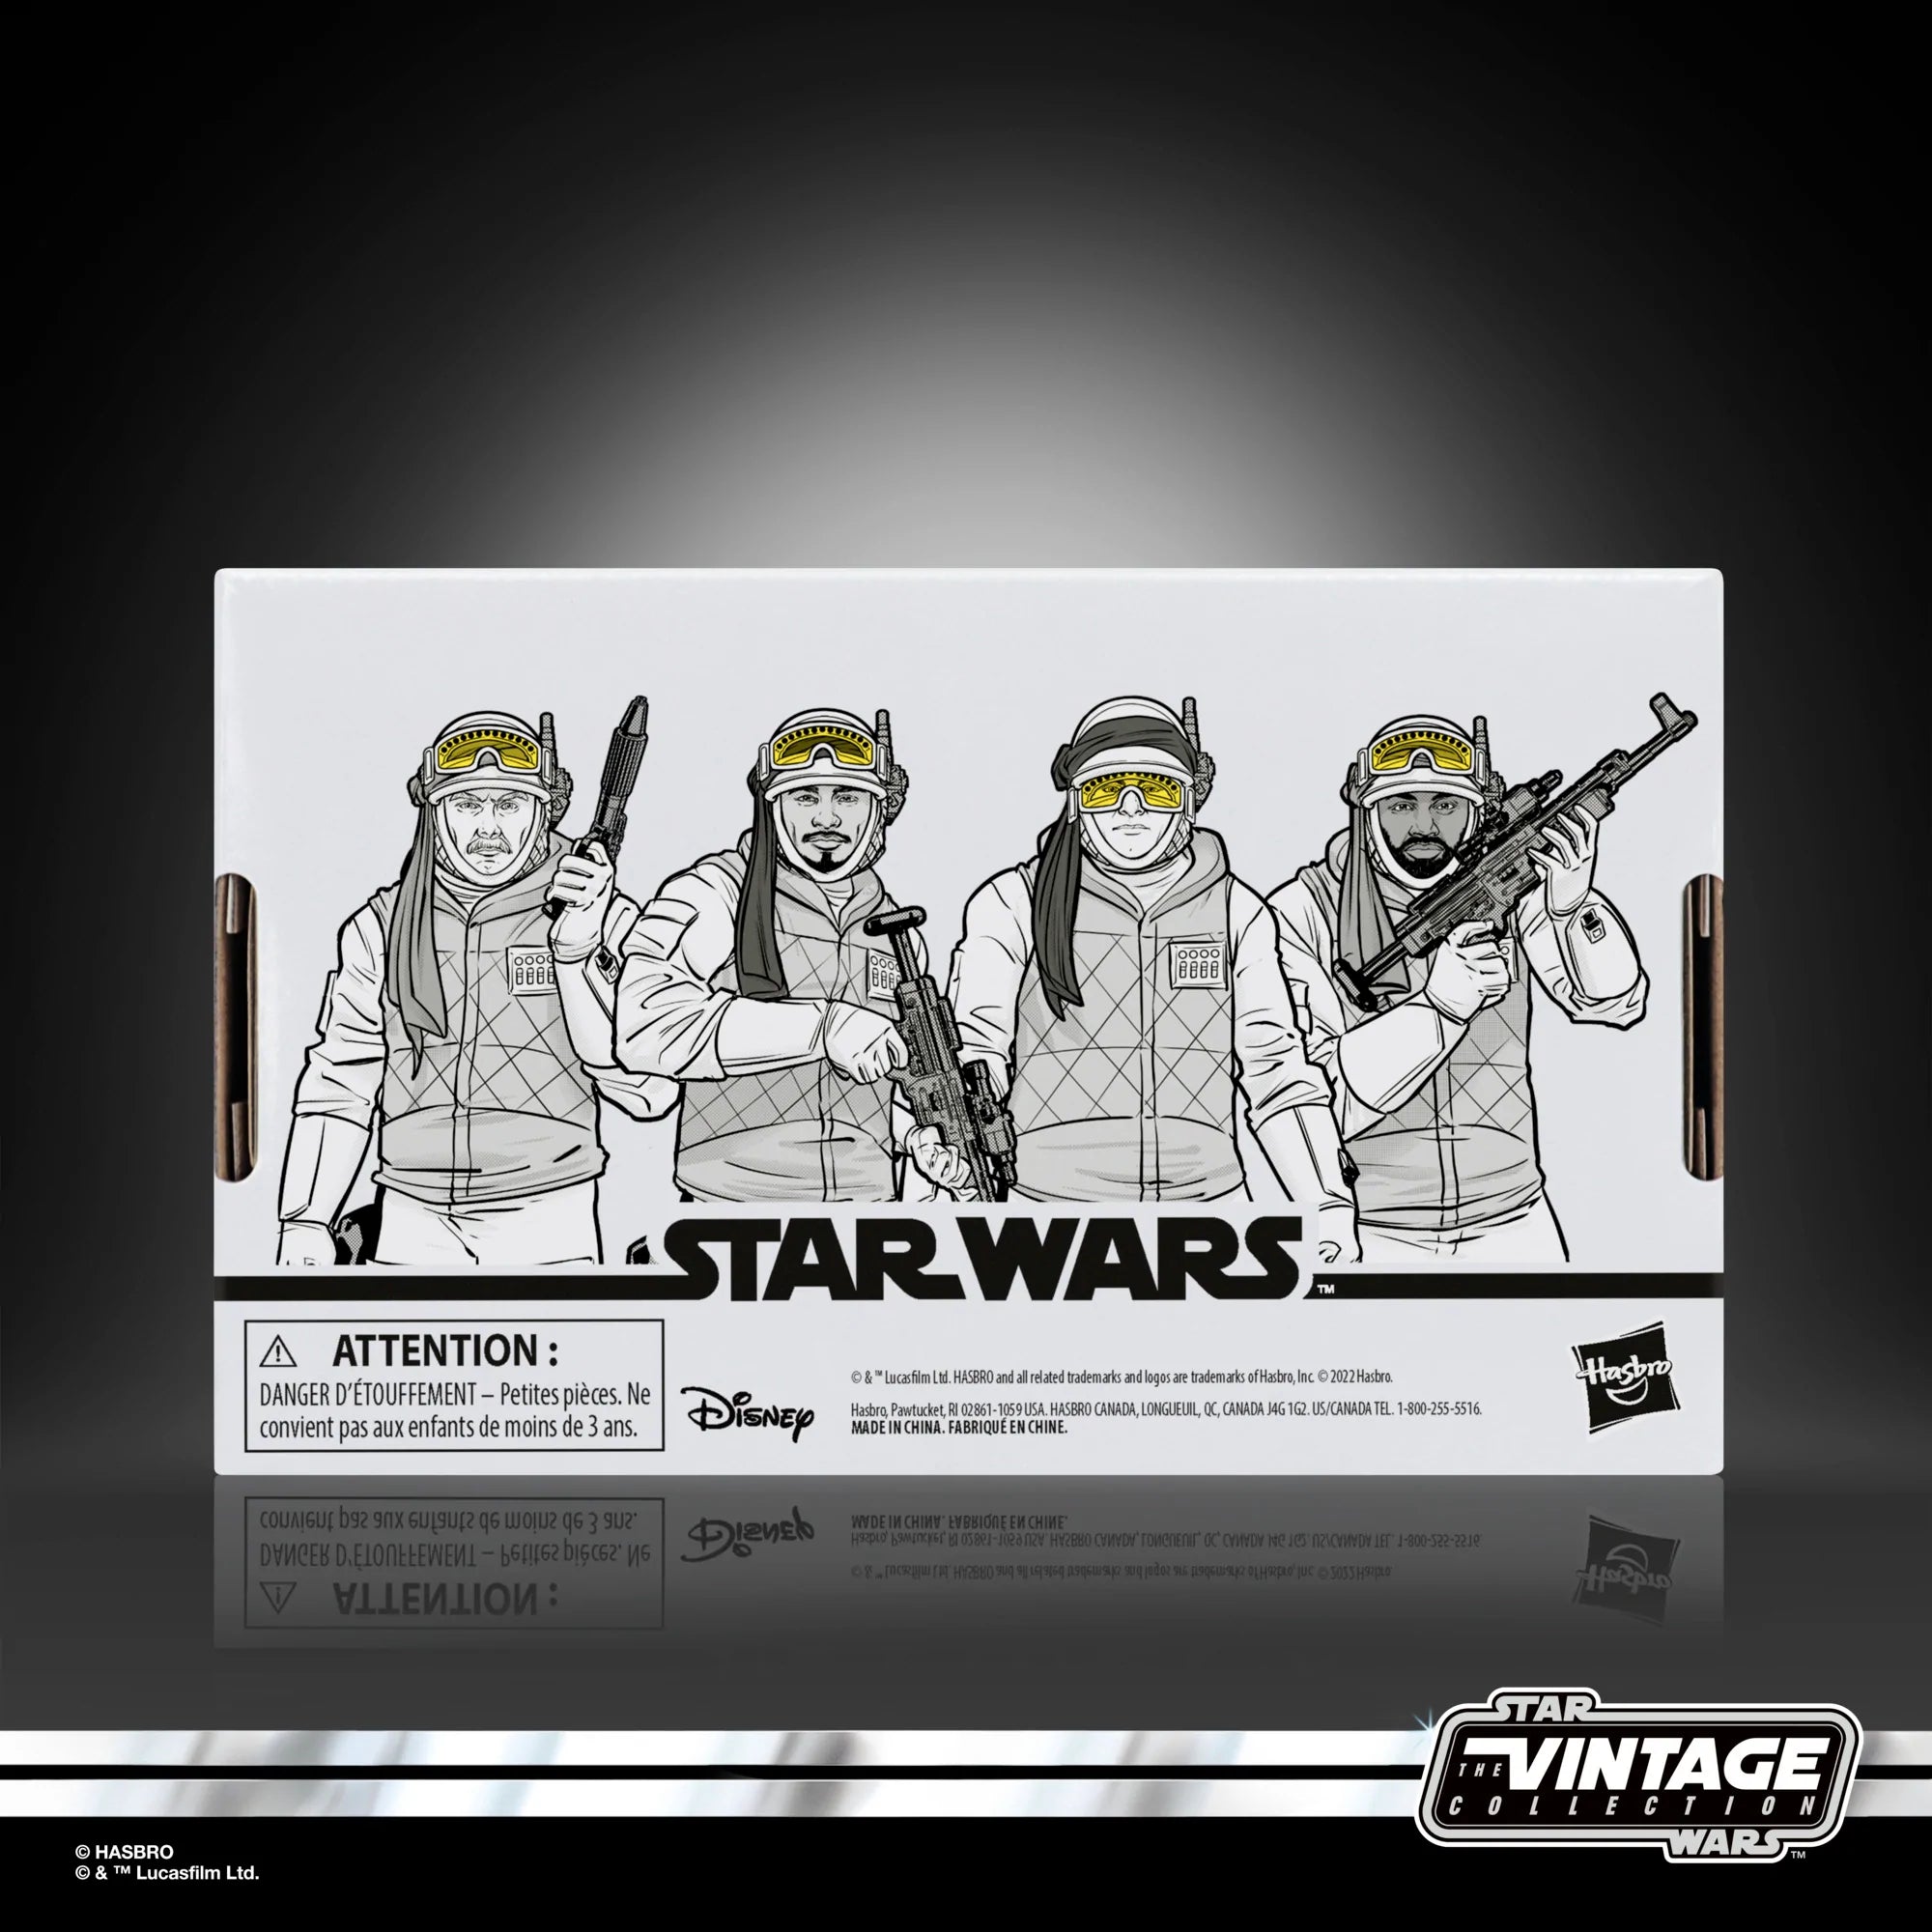 Hasbro - Star Wars The Vintage Collection - Rebel Soldier (Echo Base Battle Gear) 4-Pack - Marvelous Toys